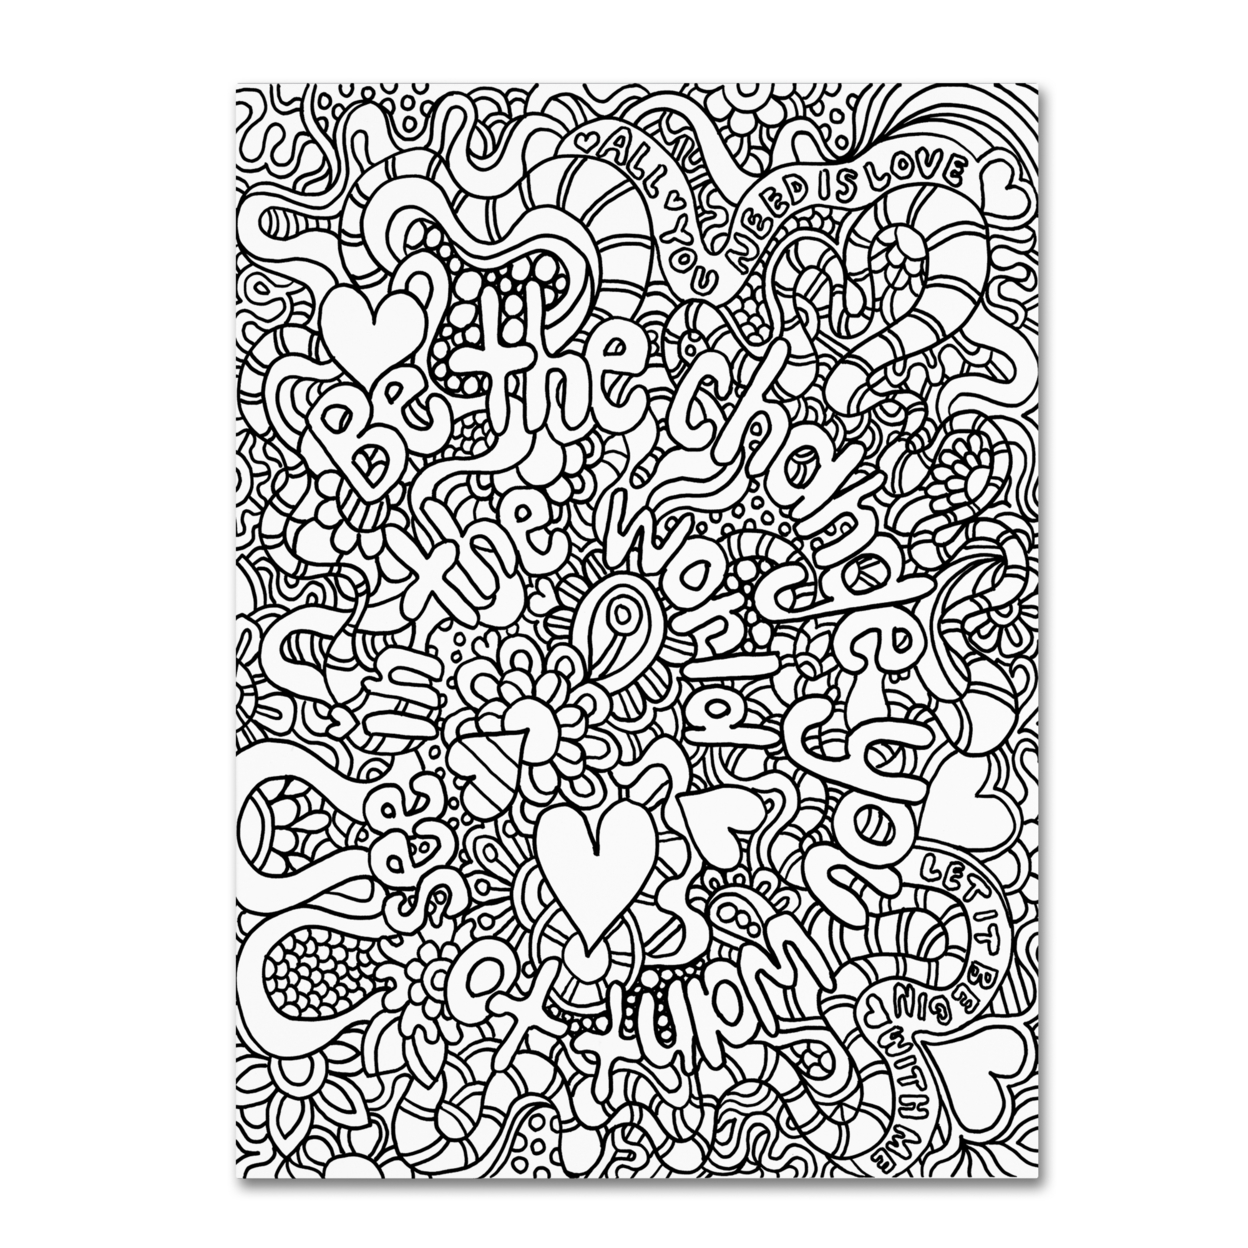 Kathy G. Ahrens 'Mixed Coloring Book 39' Canvas Wall Art 35 X 47 Inches